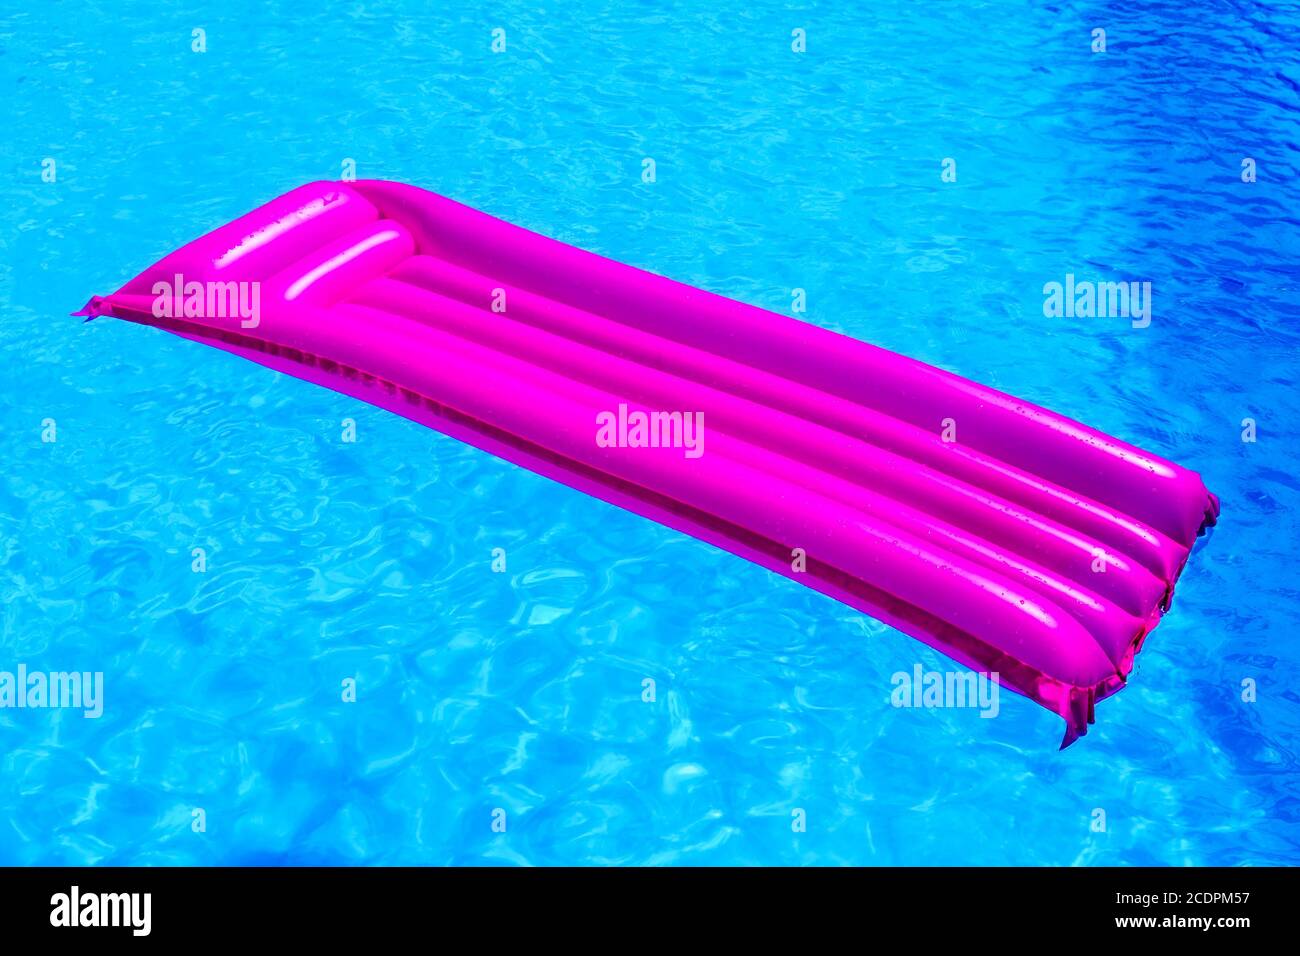 Pink air mattress floating on water of swimming pool Stock Photo